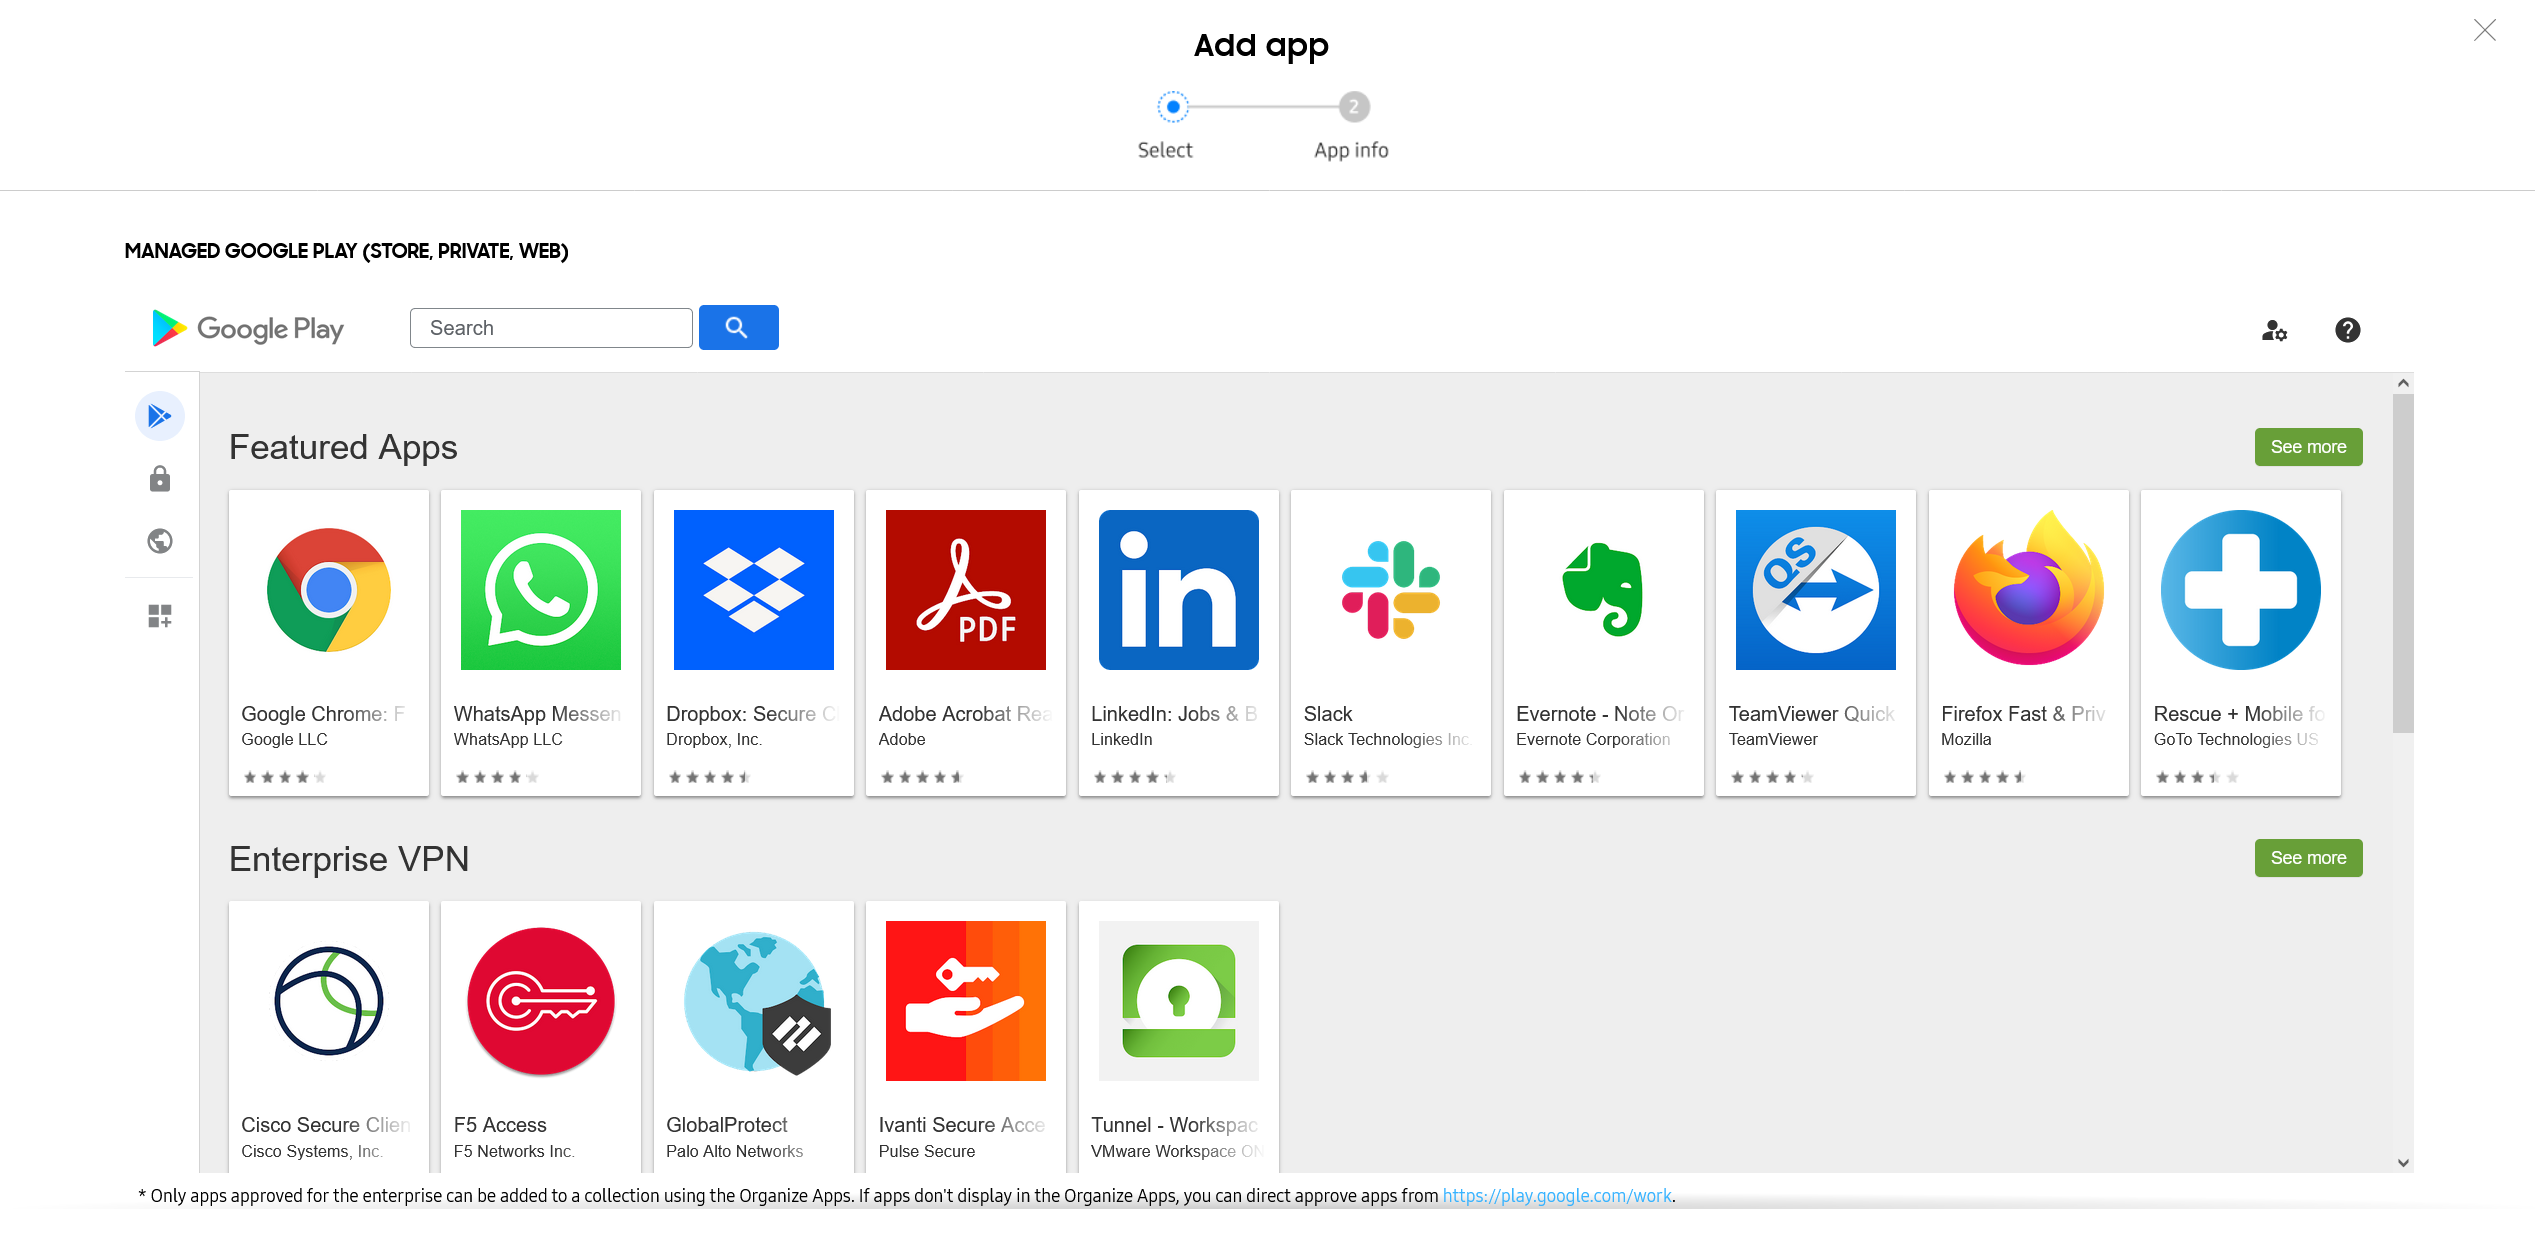 Managed Google Play page